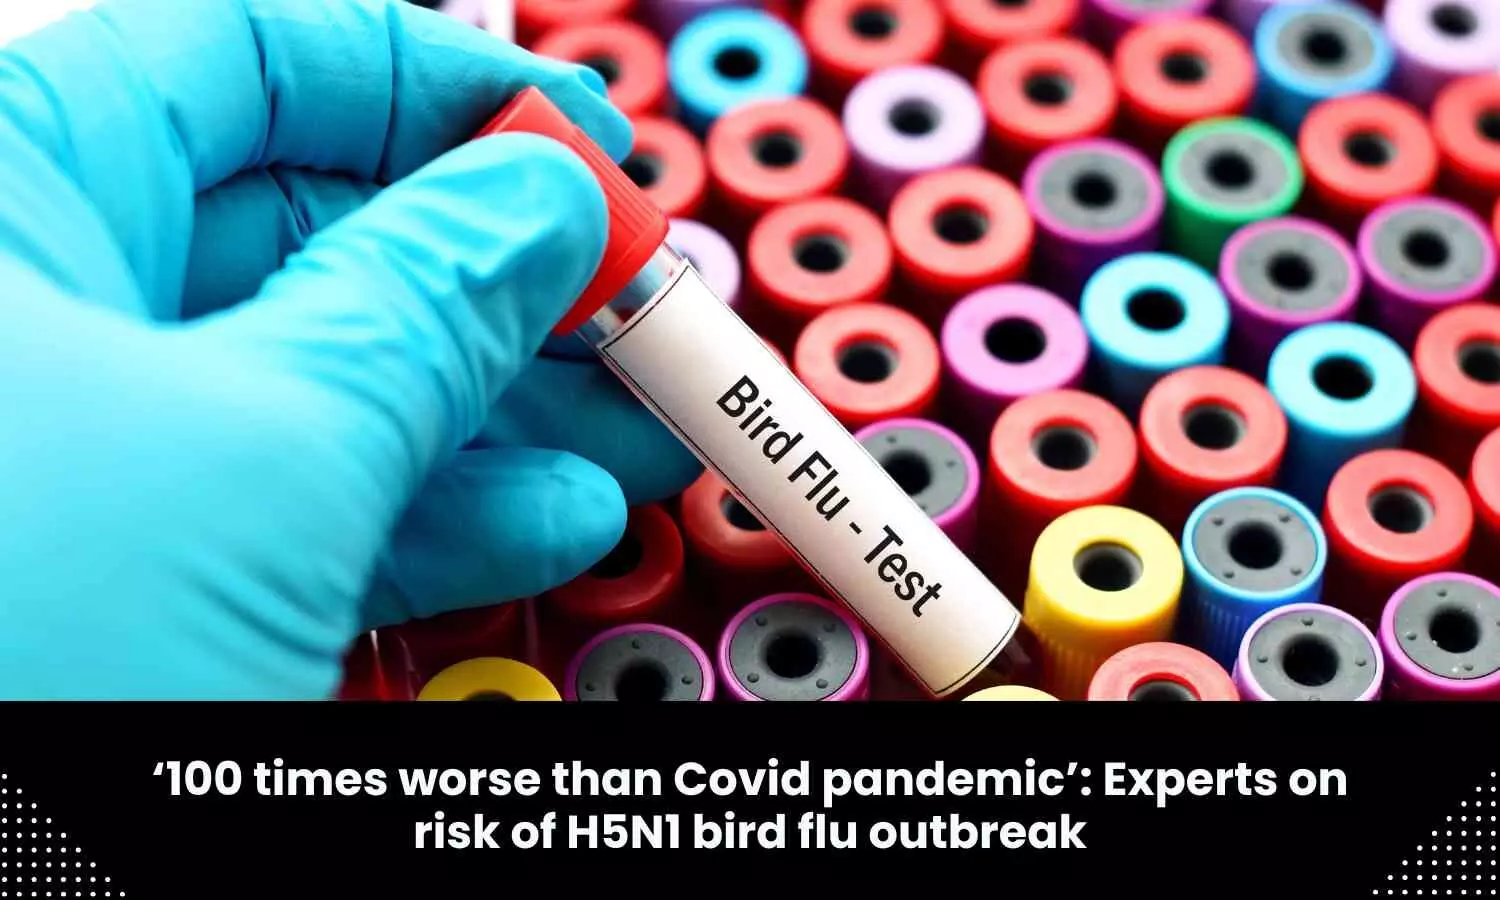 Bird flu outbreak 100 times worse than COVID: Experts